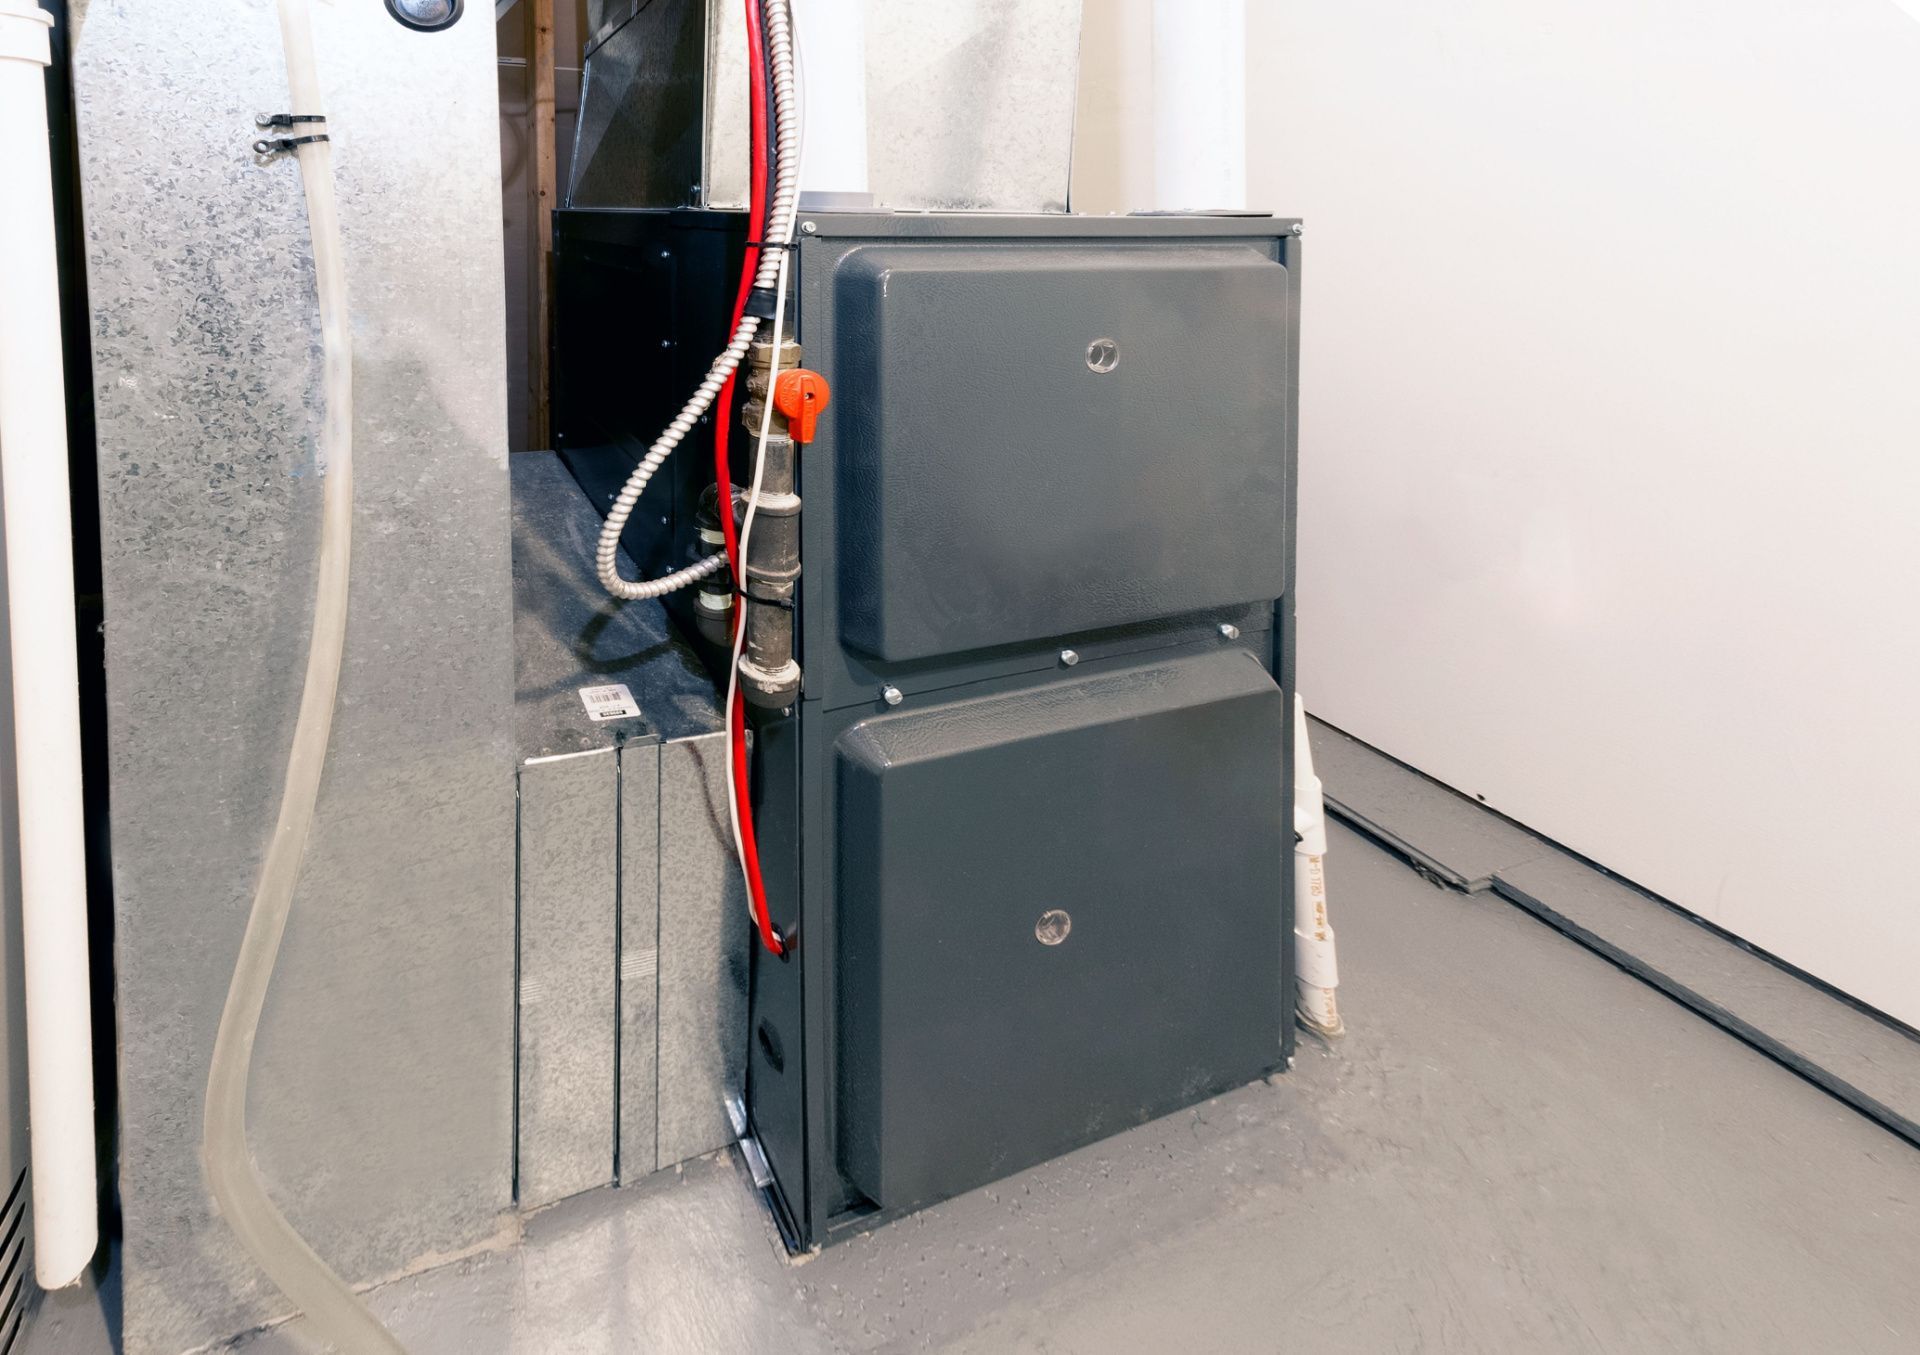 Furnace Installation and Repair in Central MN